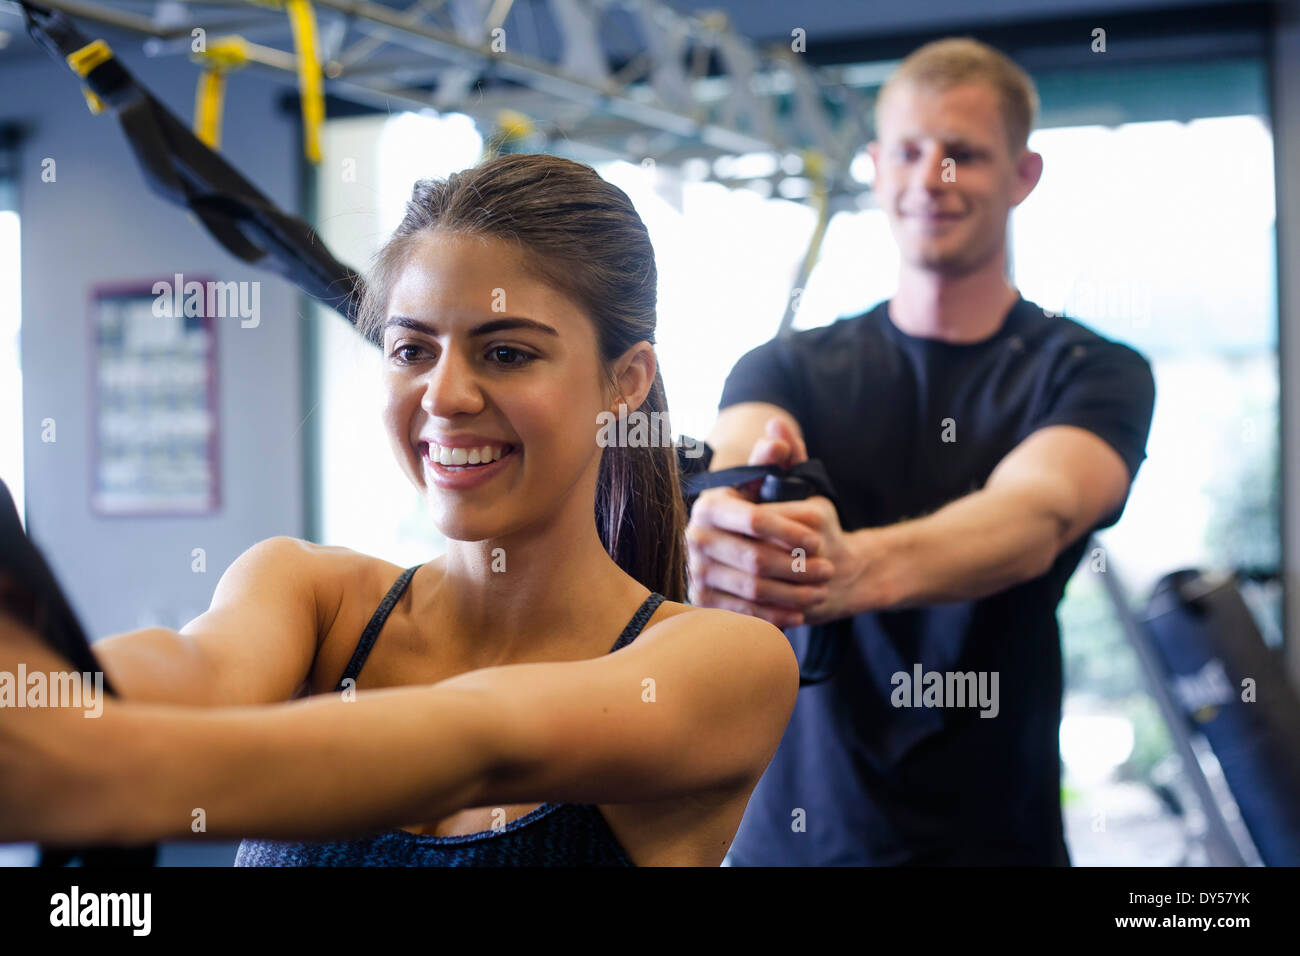 Couple working out in gym Banque D'Images